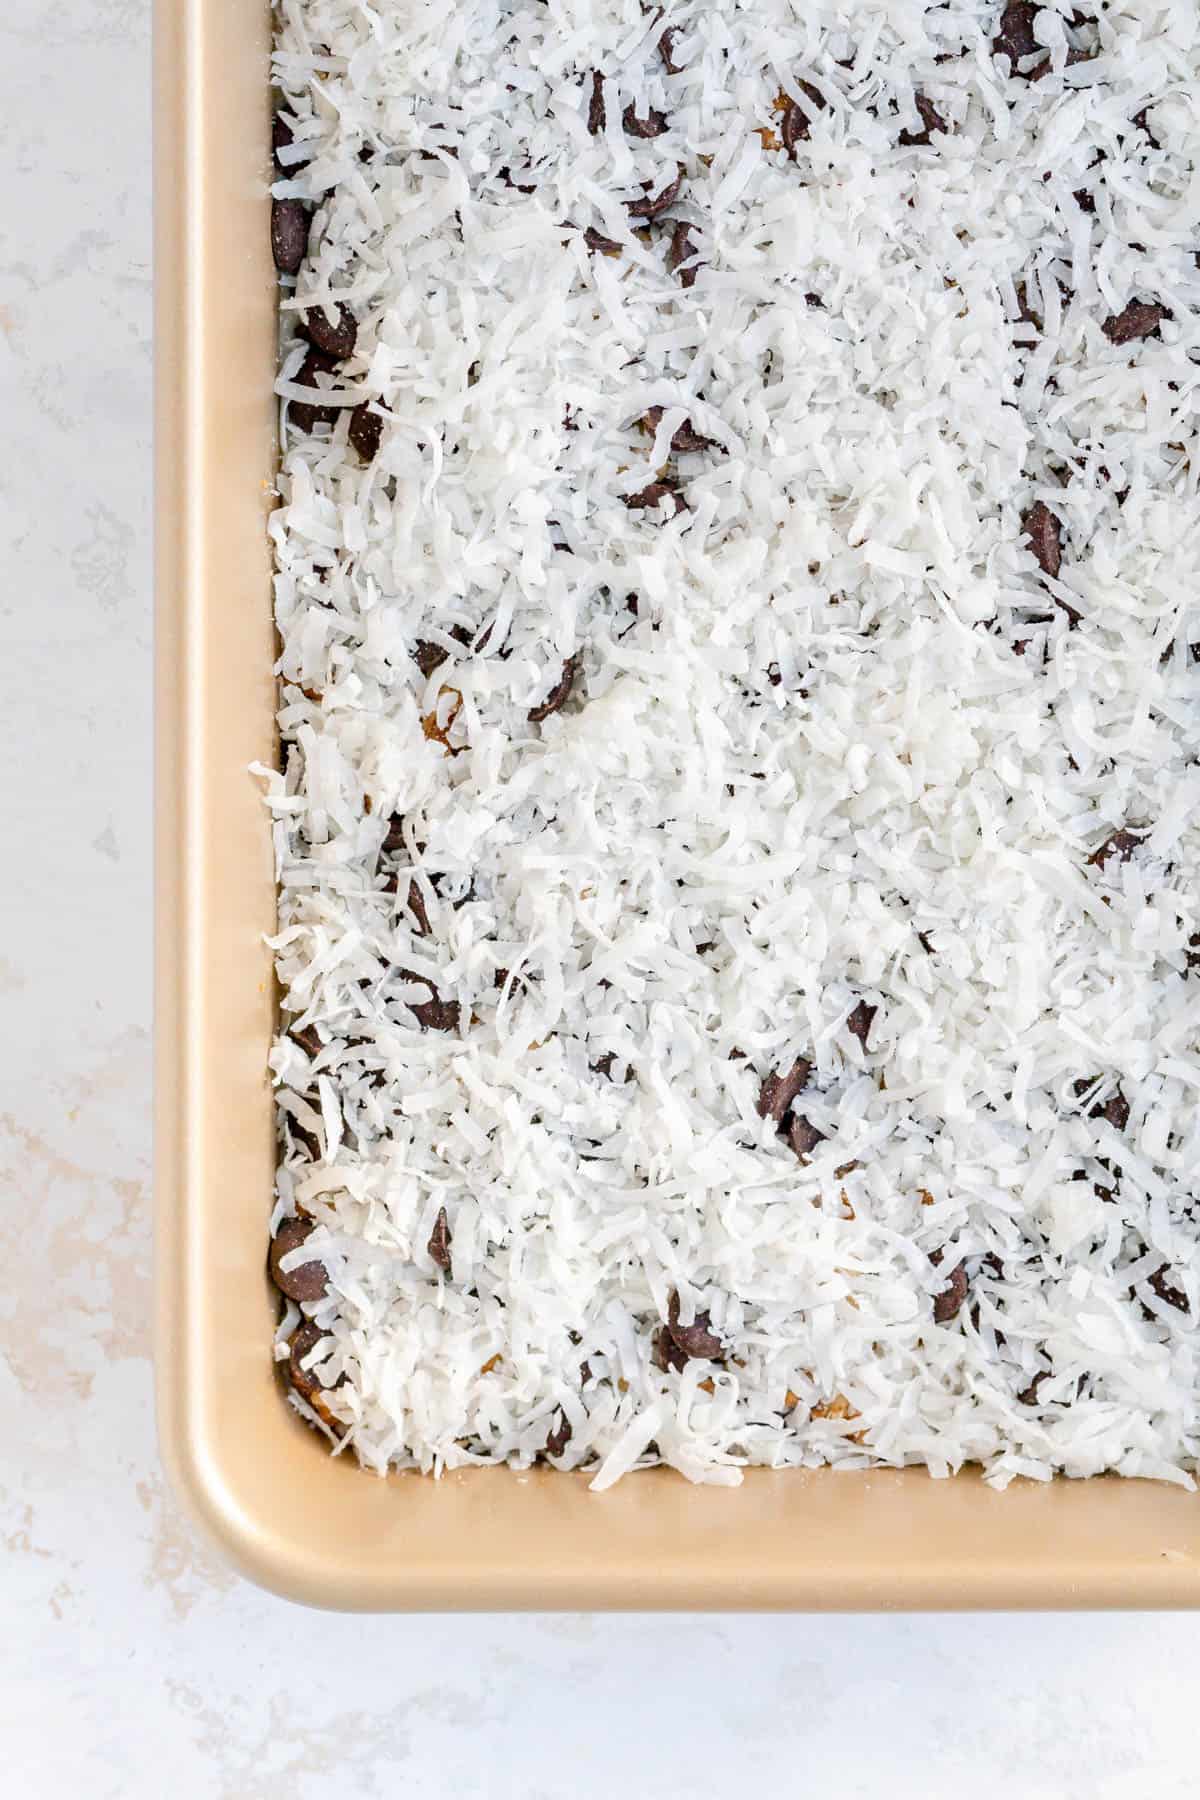 Coconut sprinkled over chocolate chips in a gold pan of seven layer bars